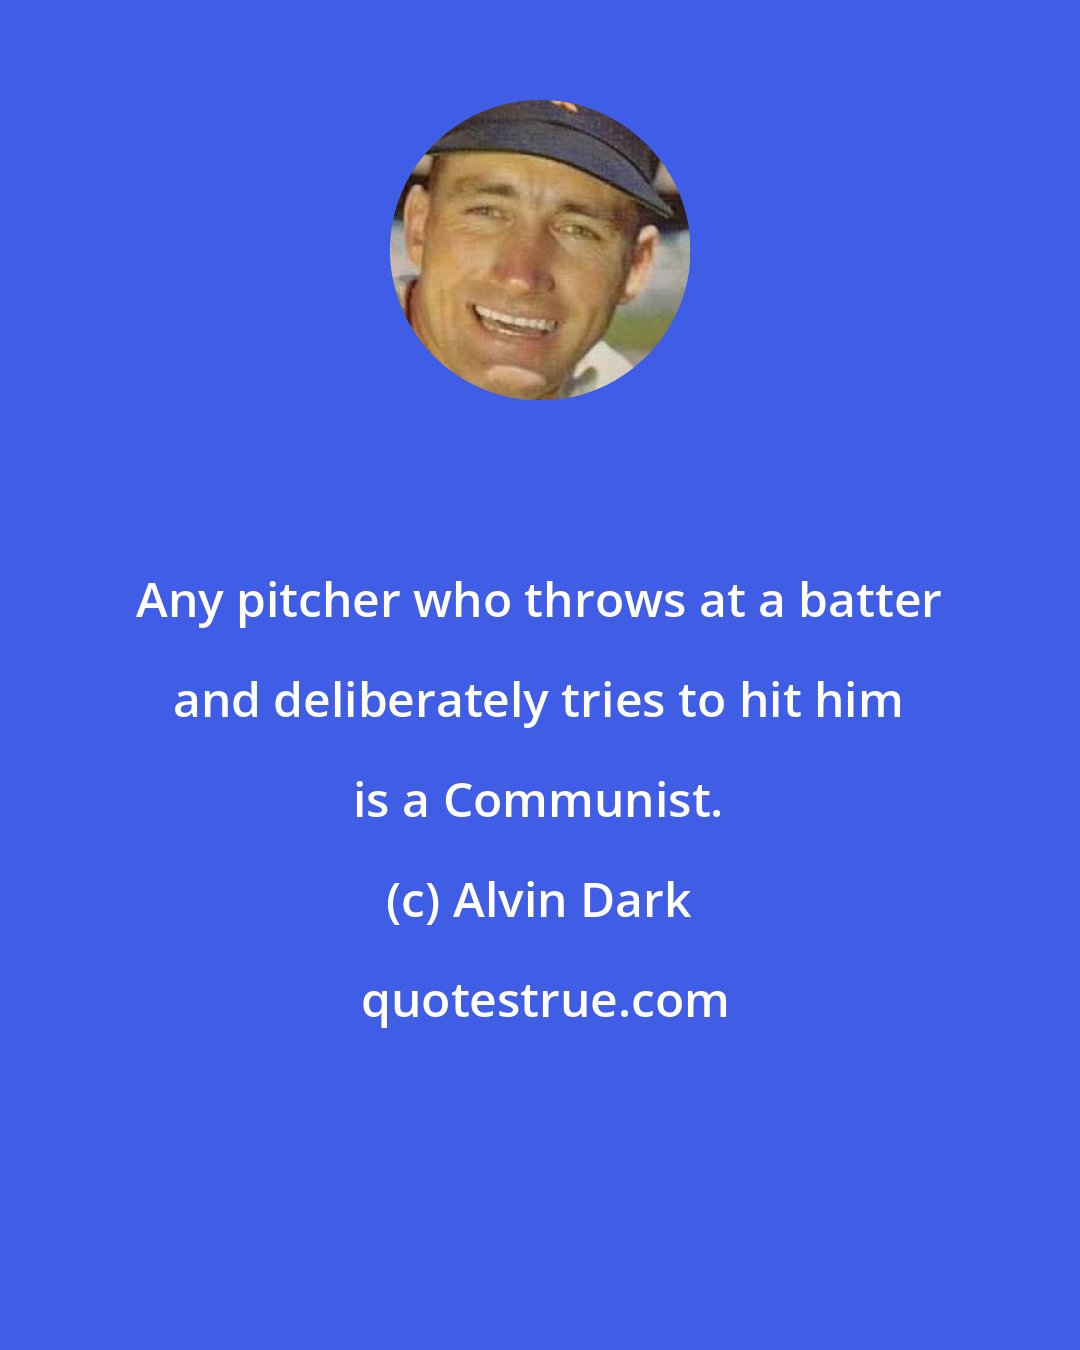 Alvin Dark: Any pitcher who throws at a batter and deliberately tries to hit him is a Communist.